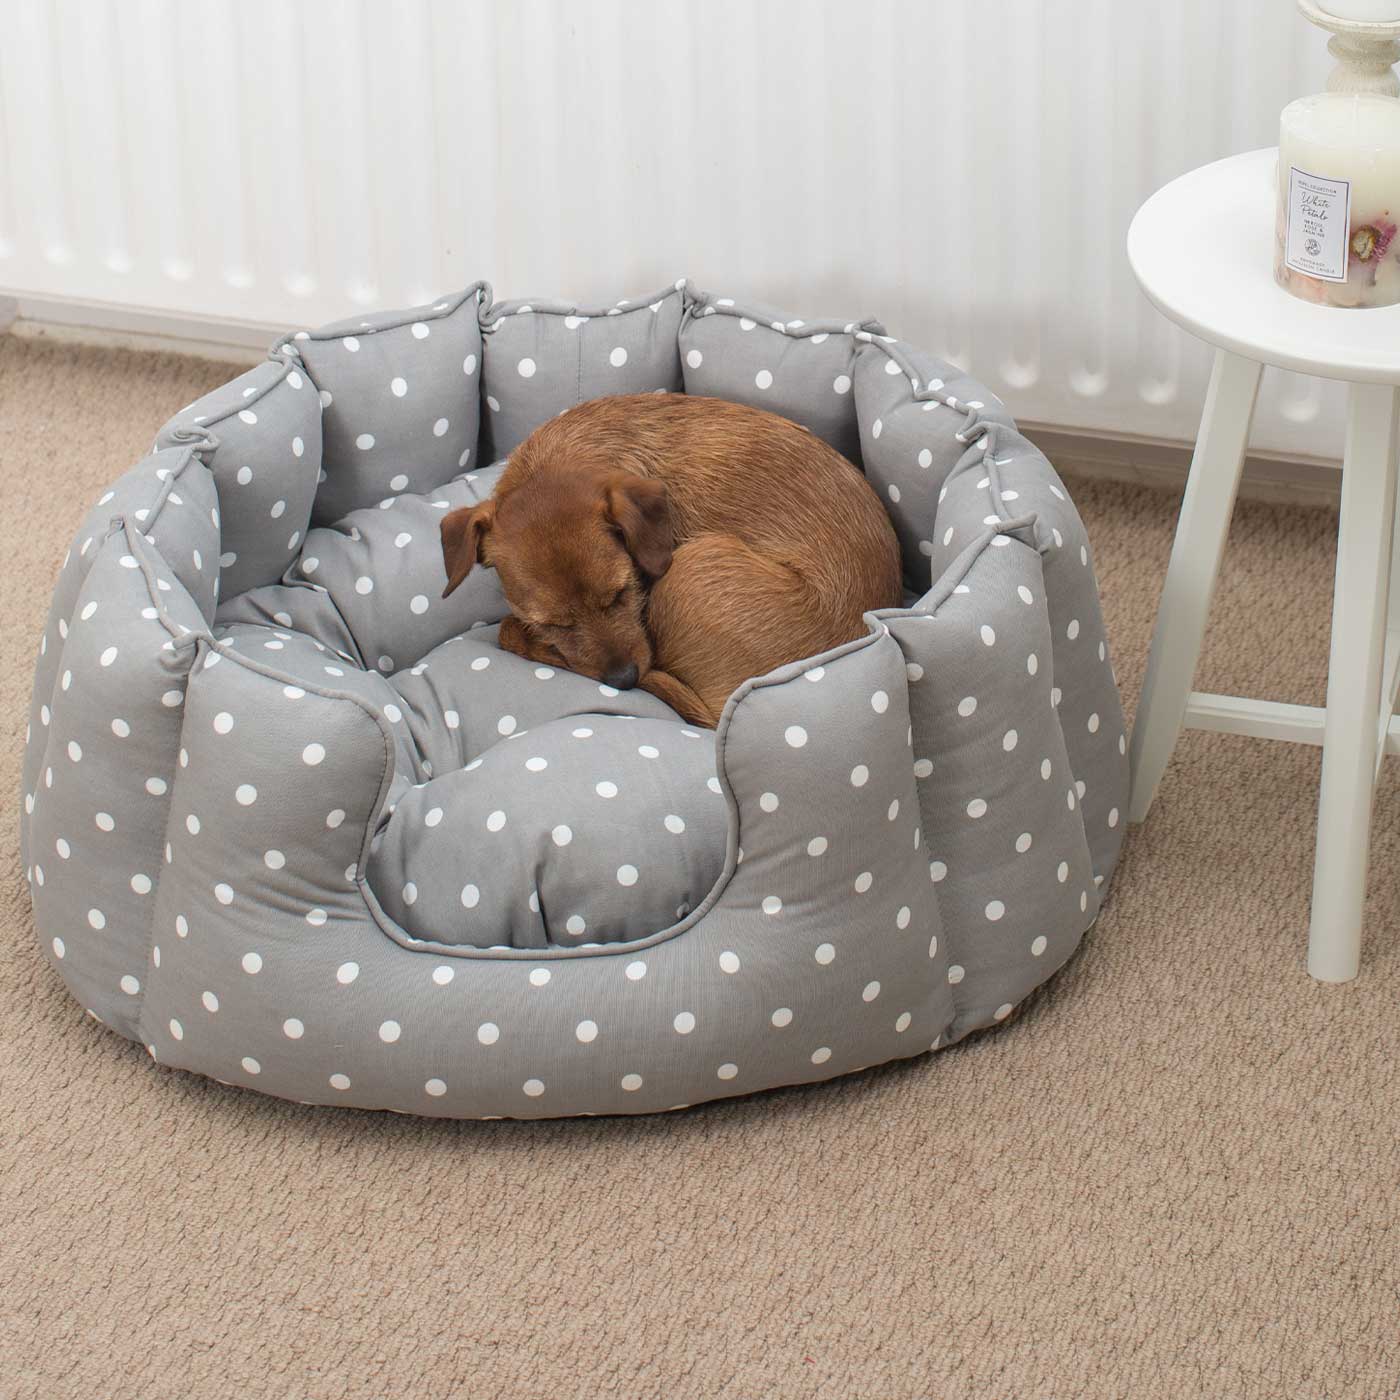 Discover Our Luxurious High Wall Bed For Dogs & Puppies, Featuring Reversible Inner Cushion With Teddy Fleece To Craft The Perfect Dog Bed In Stunning Grey Spot! Available To Personalize Now at Lords & Labradors US